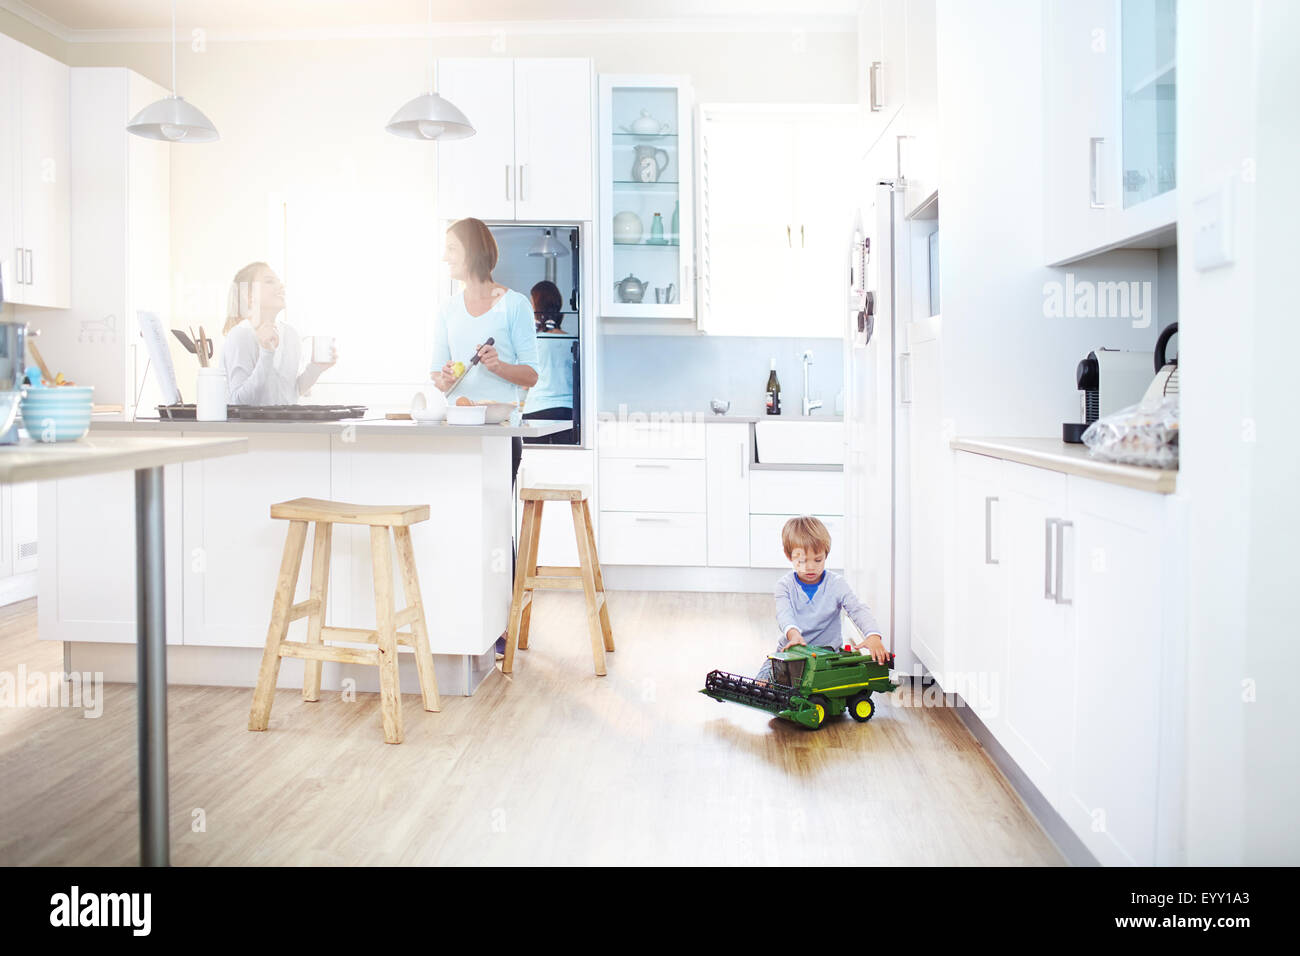 Women cooking in kitchen while boy plays with toy tractor on floor Stock Photo